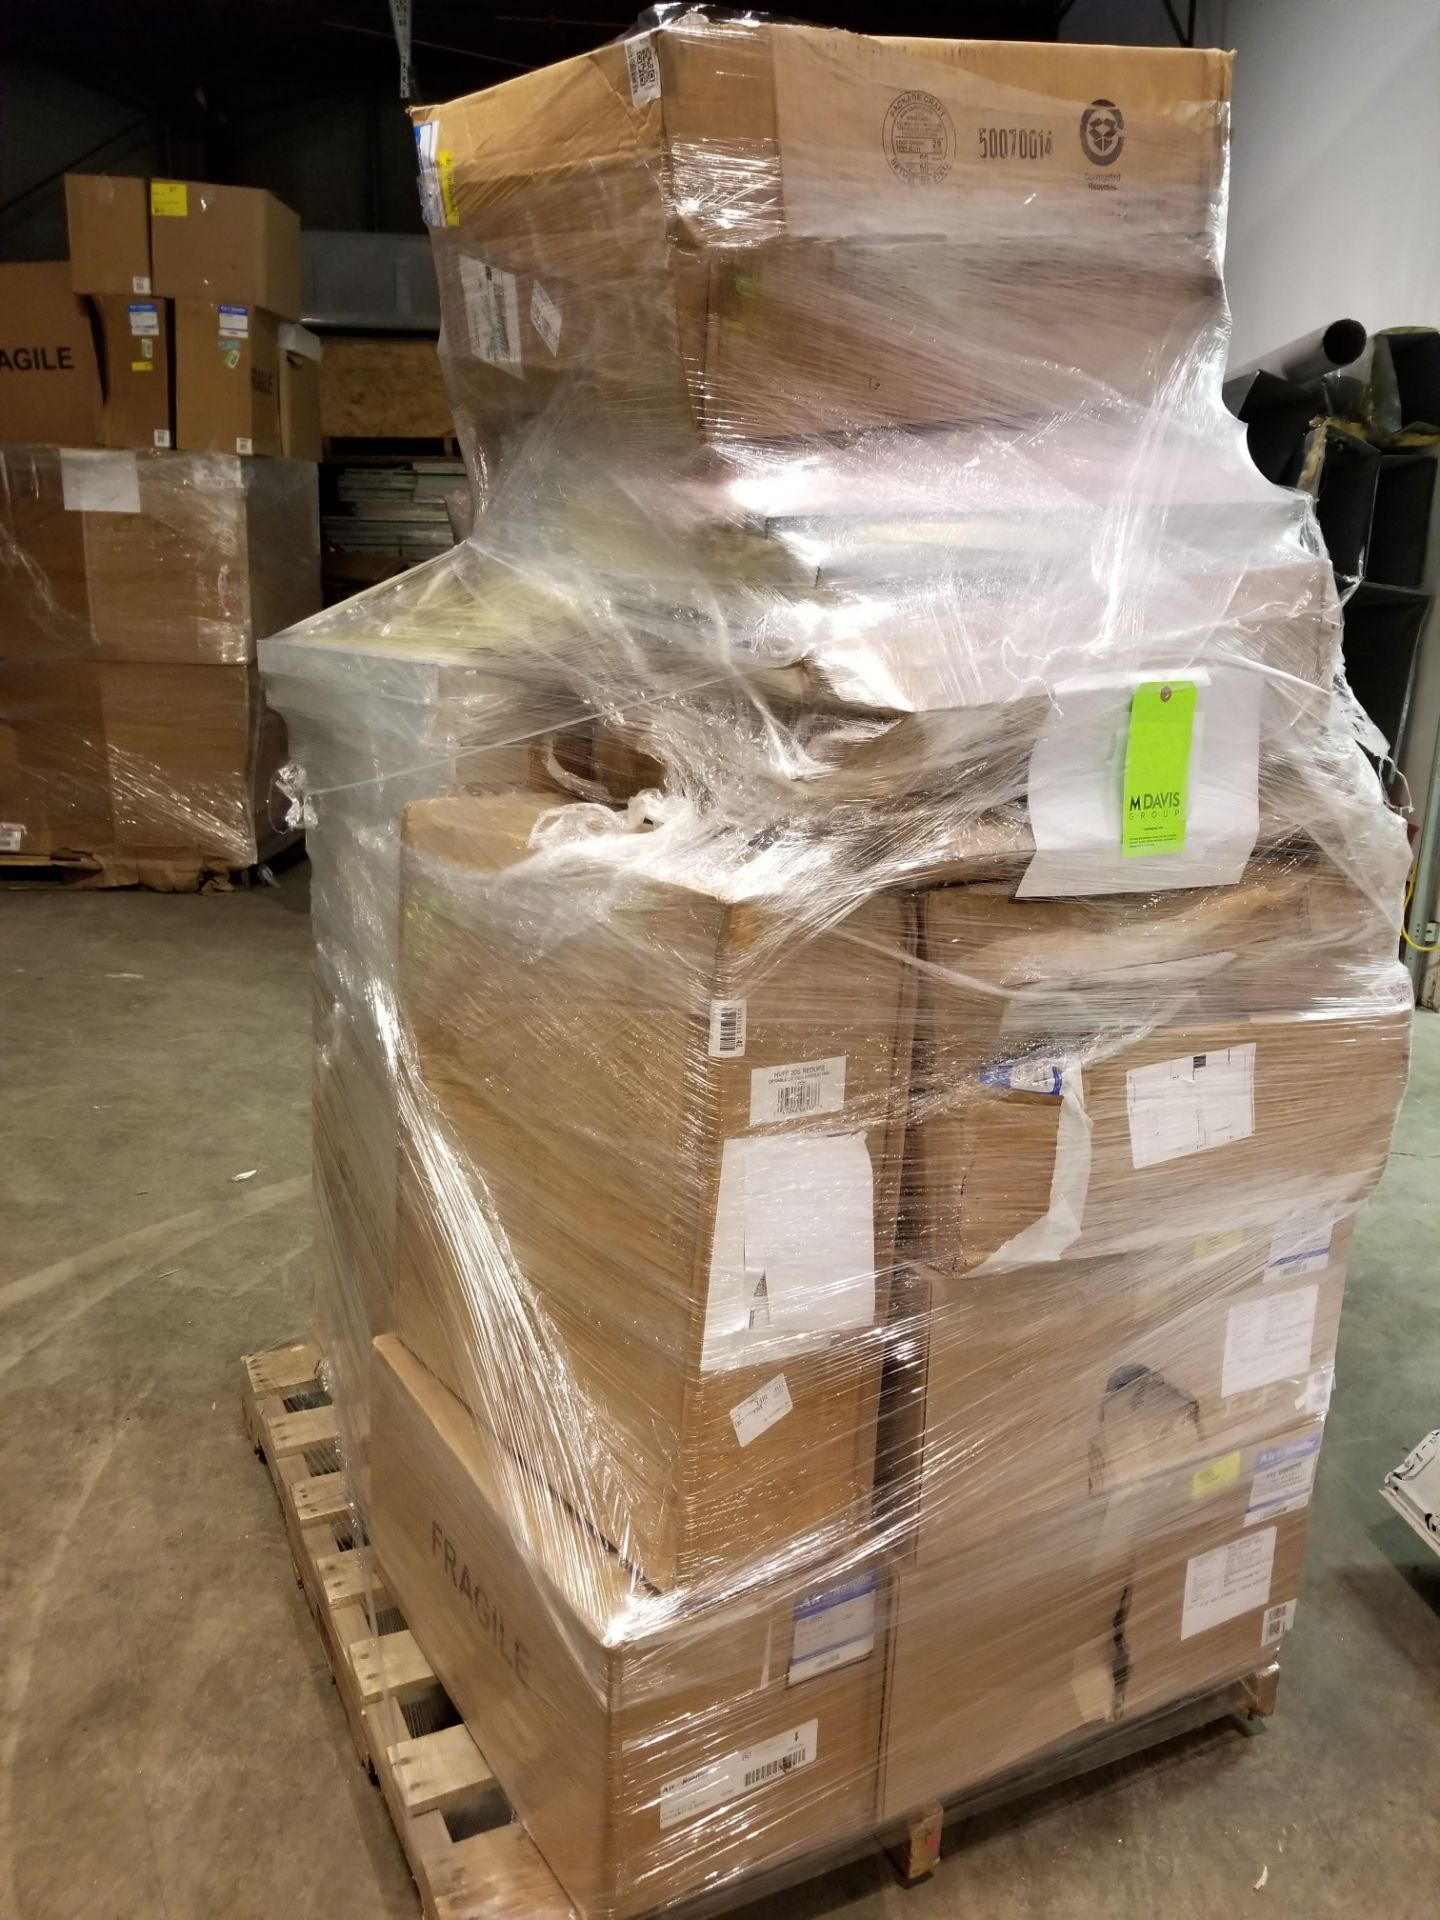 Whole 3 pallets, 137 air filters: New filters. Grainger#: 5E845(2); 5W426(2); 5M317(11); 2GHT1; - Image 3 of 3